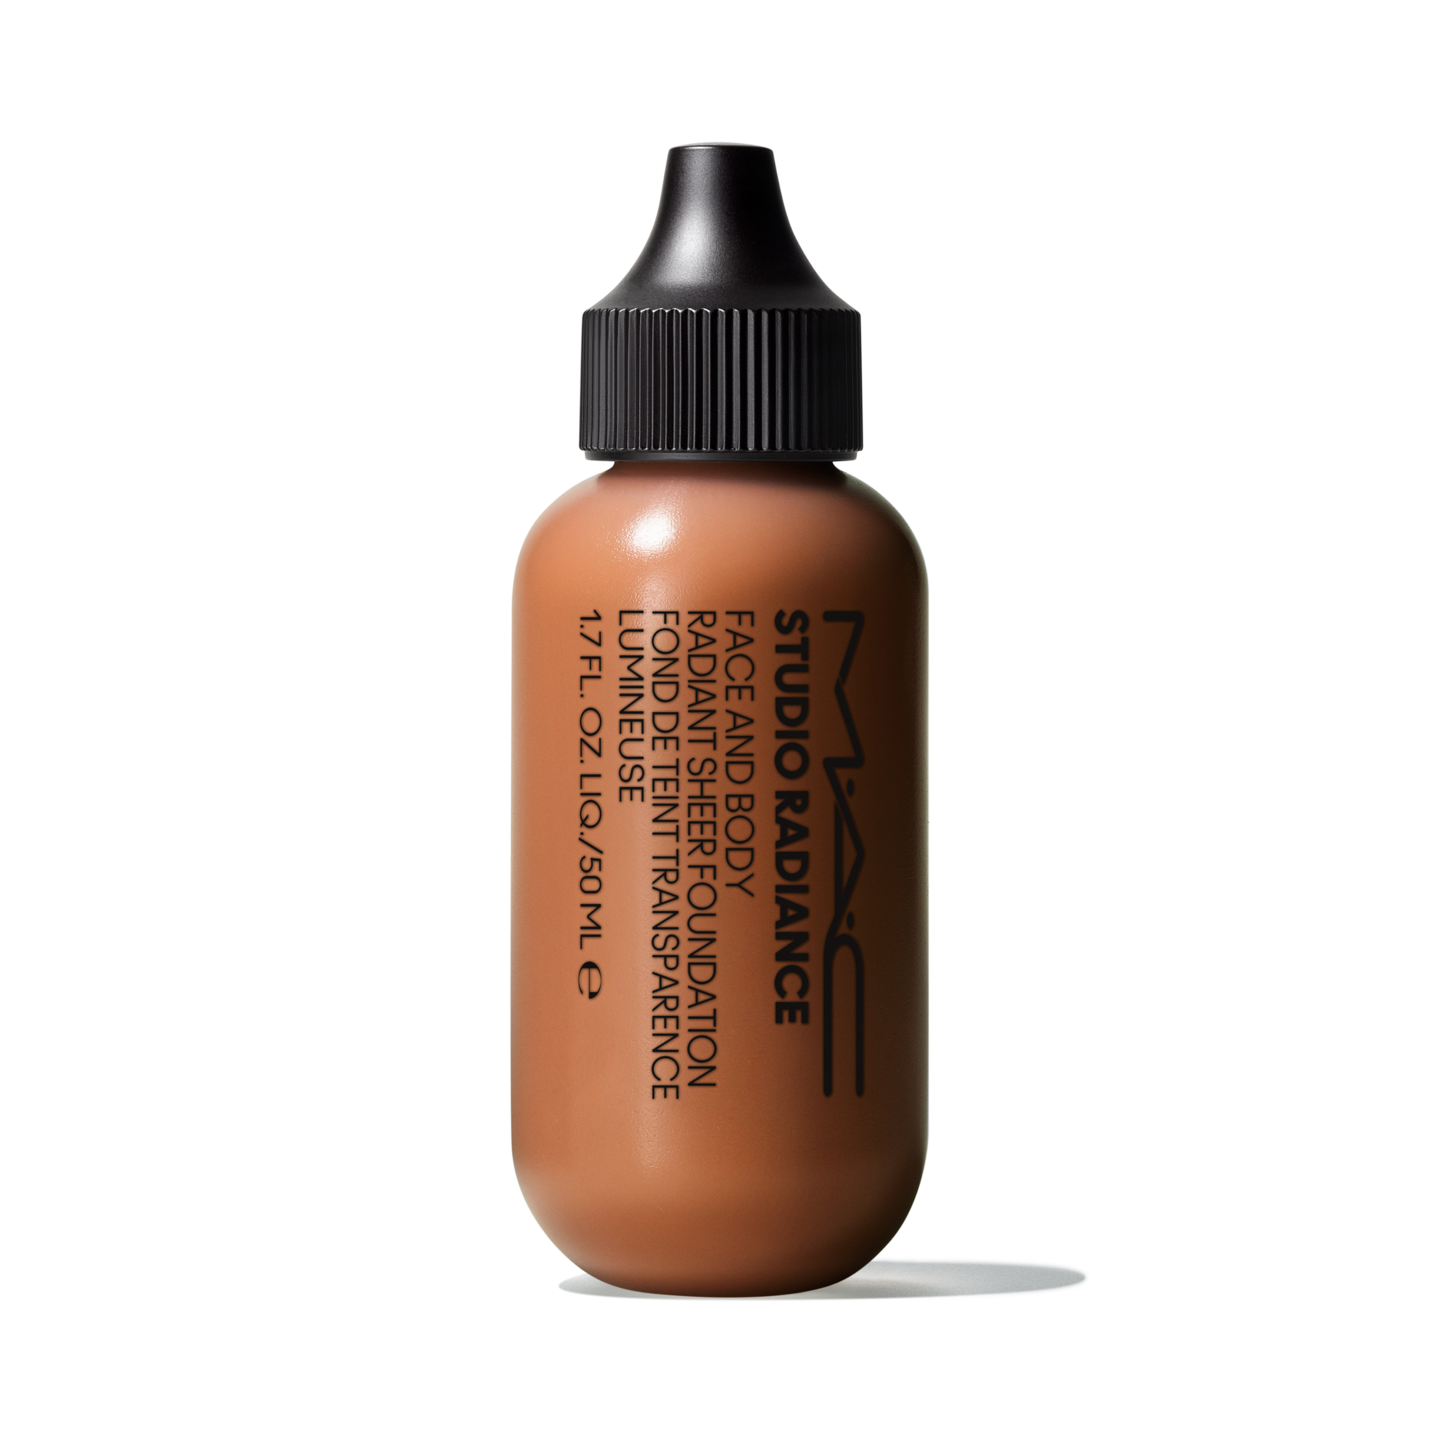 Studio Radiance Face and Radiant Foundation | Cosmetics - Official Site